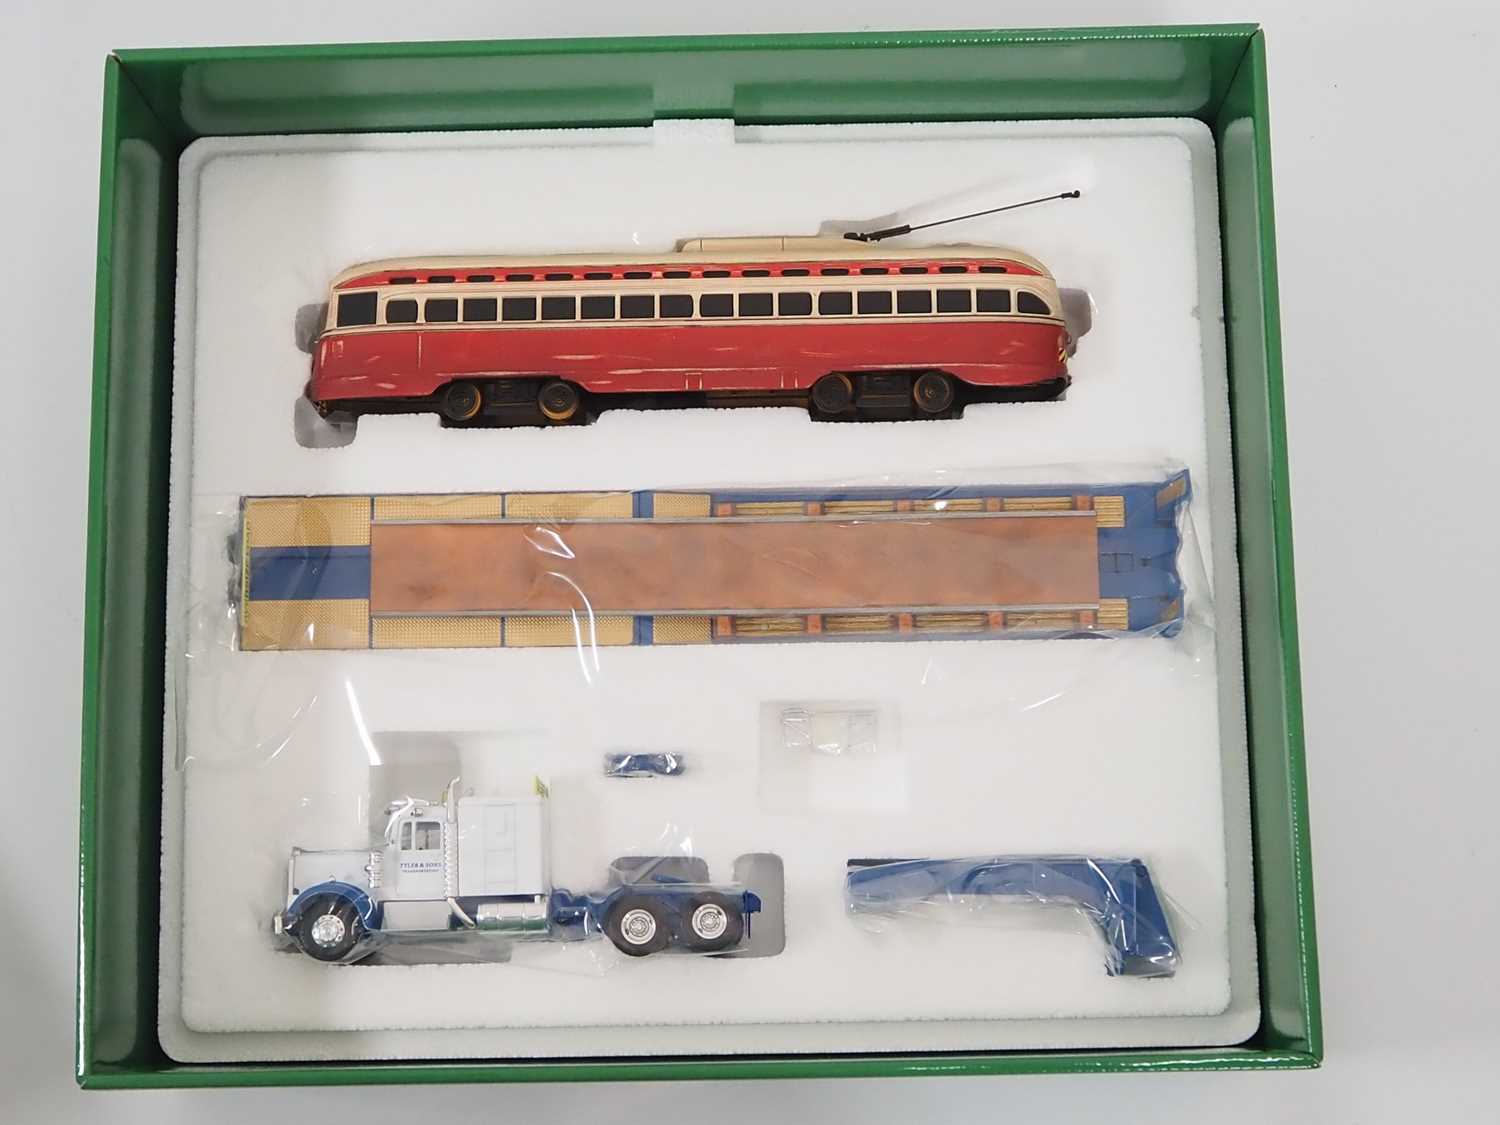 A CORGI 1:50 scale American Outline Heavy Haulers' Set US24903 in Tyler and Sons' livery hauling - Image 3 of 5